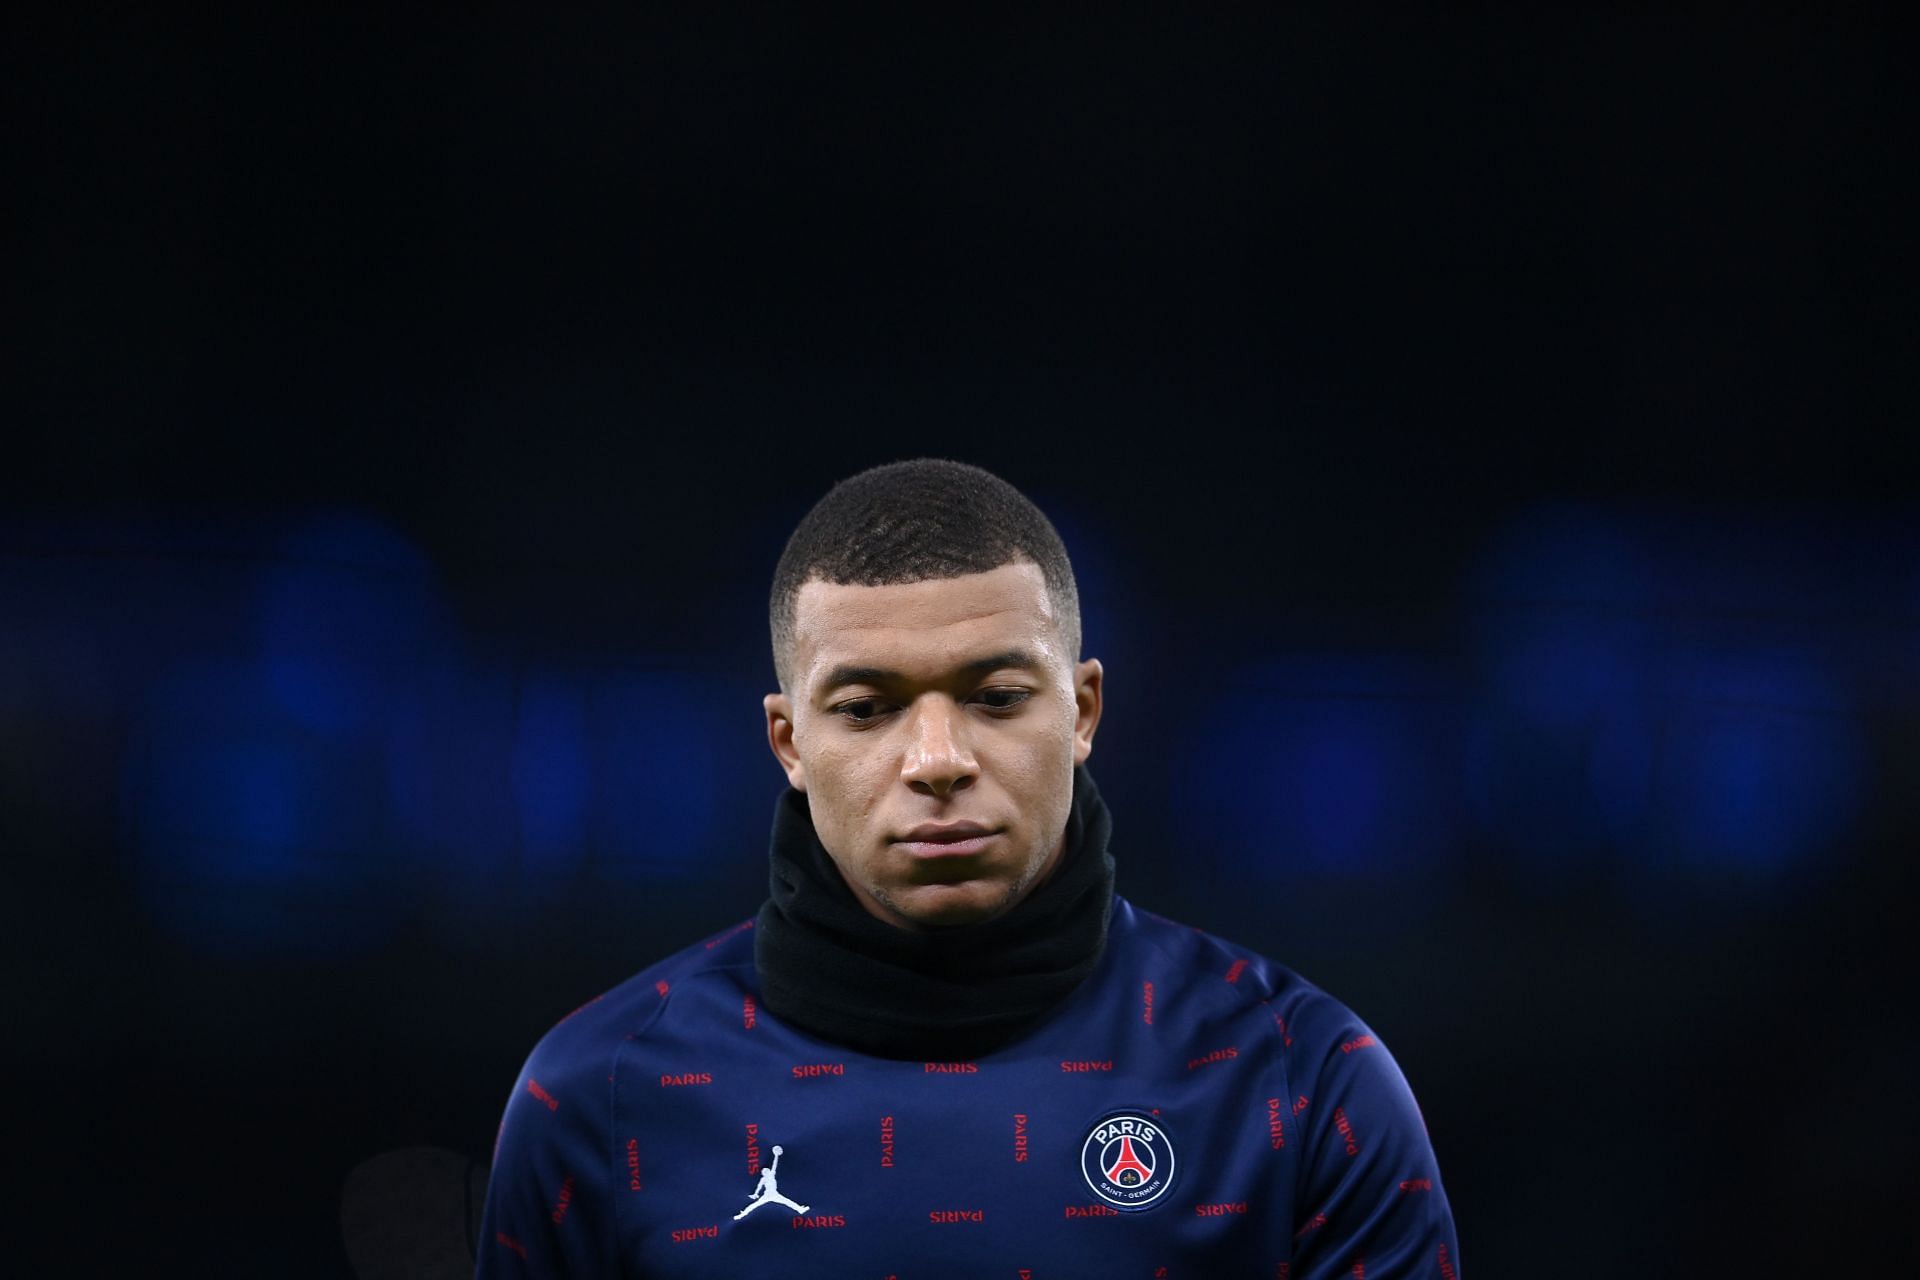 Kylian Mbappe is determined to win the Champions League with PSG.